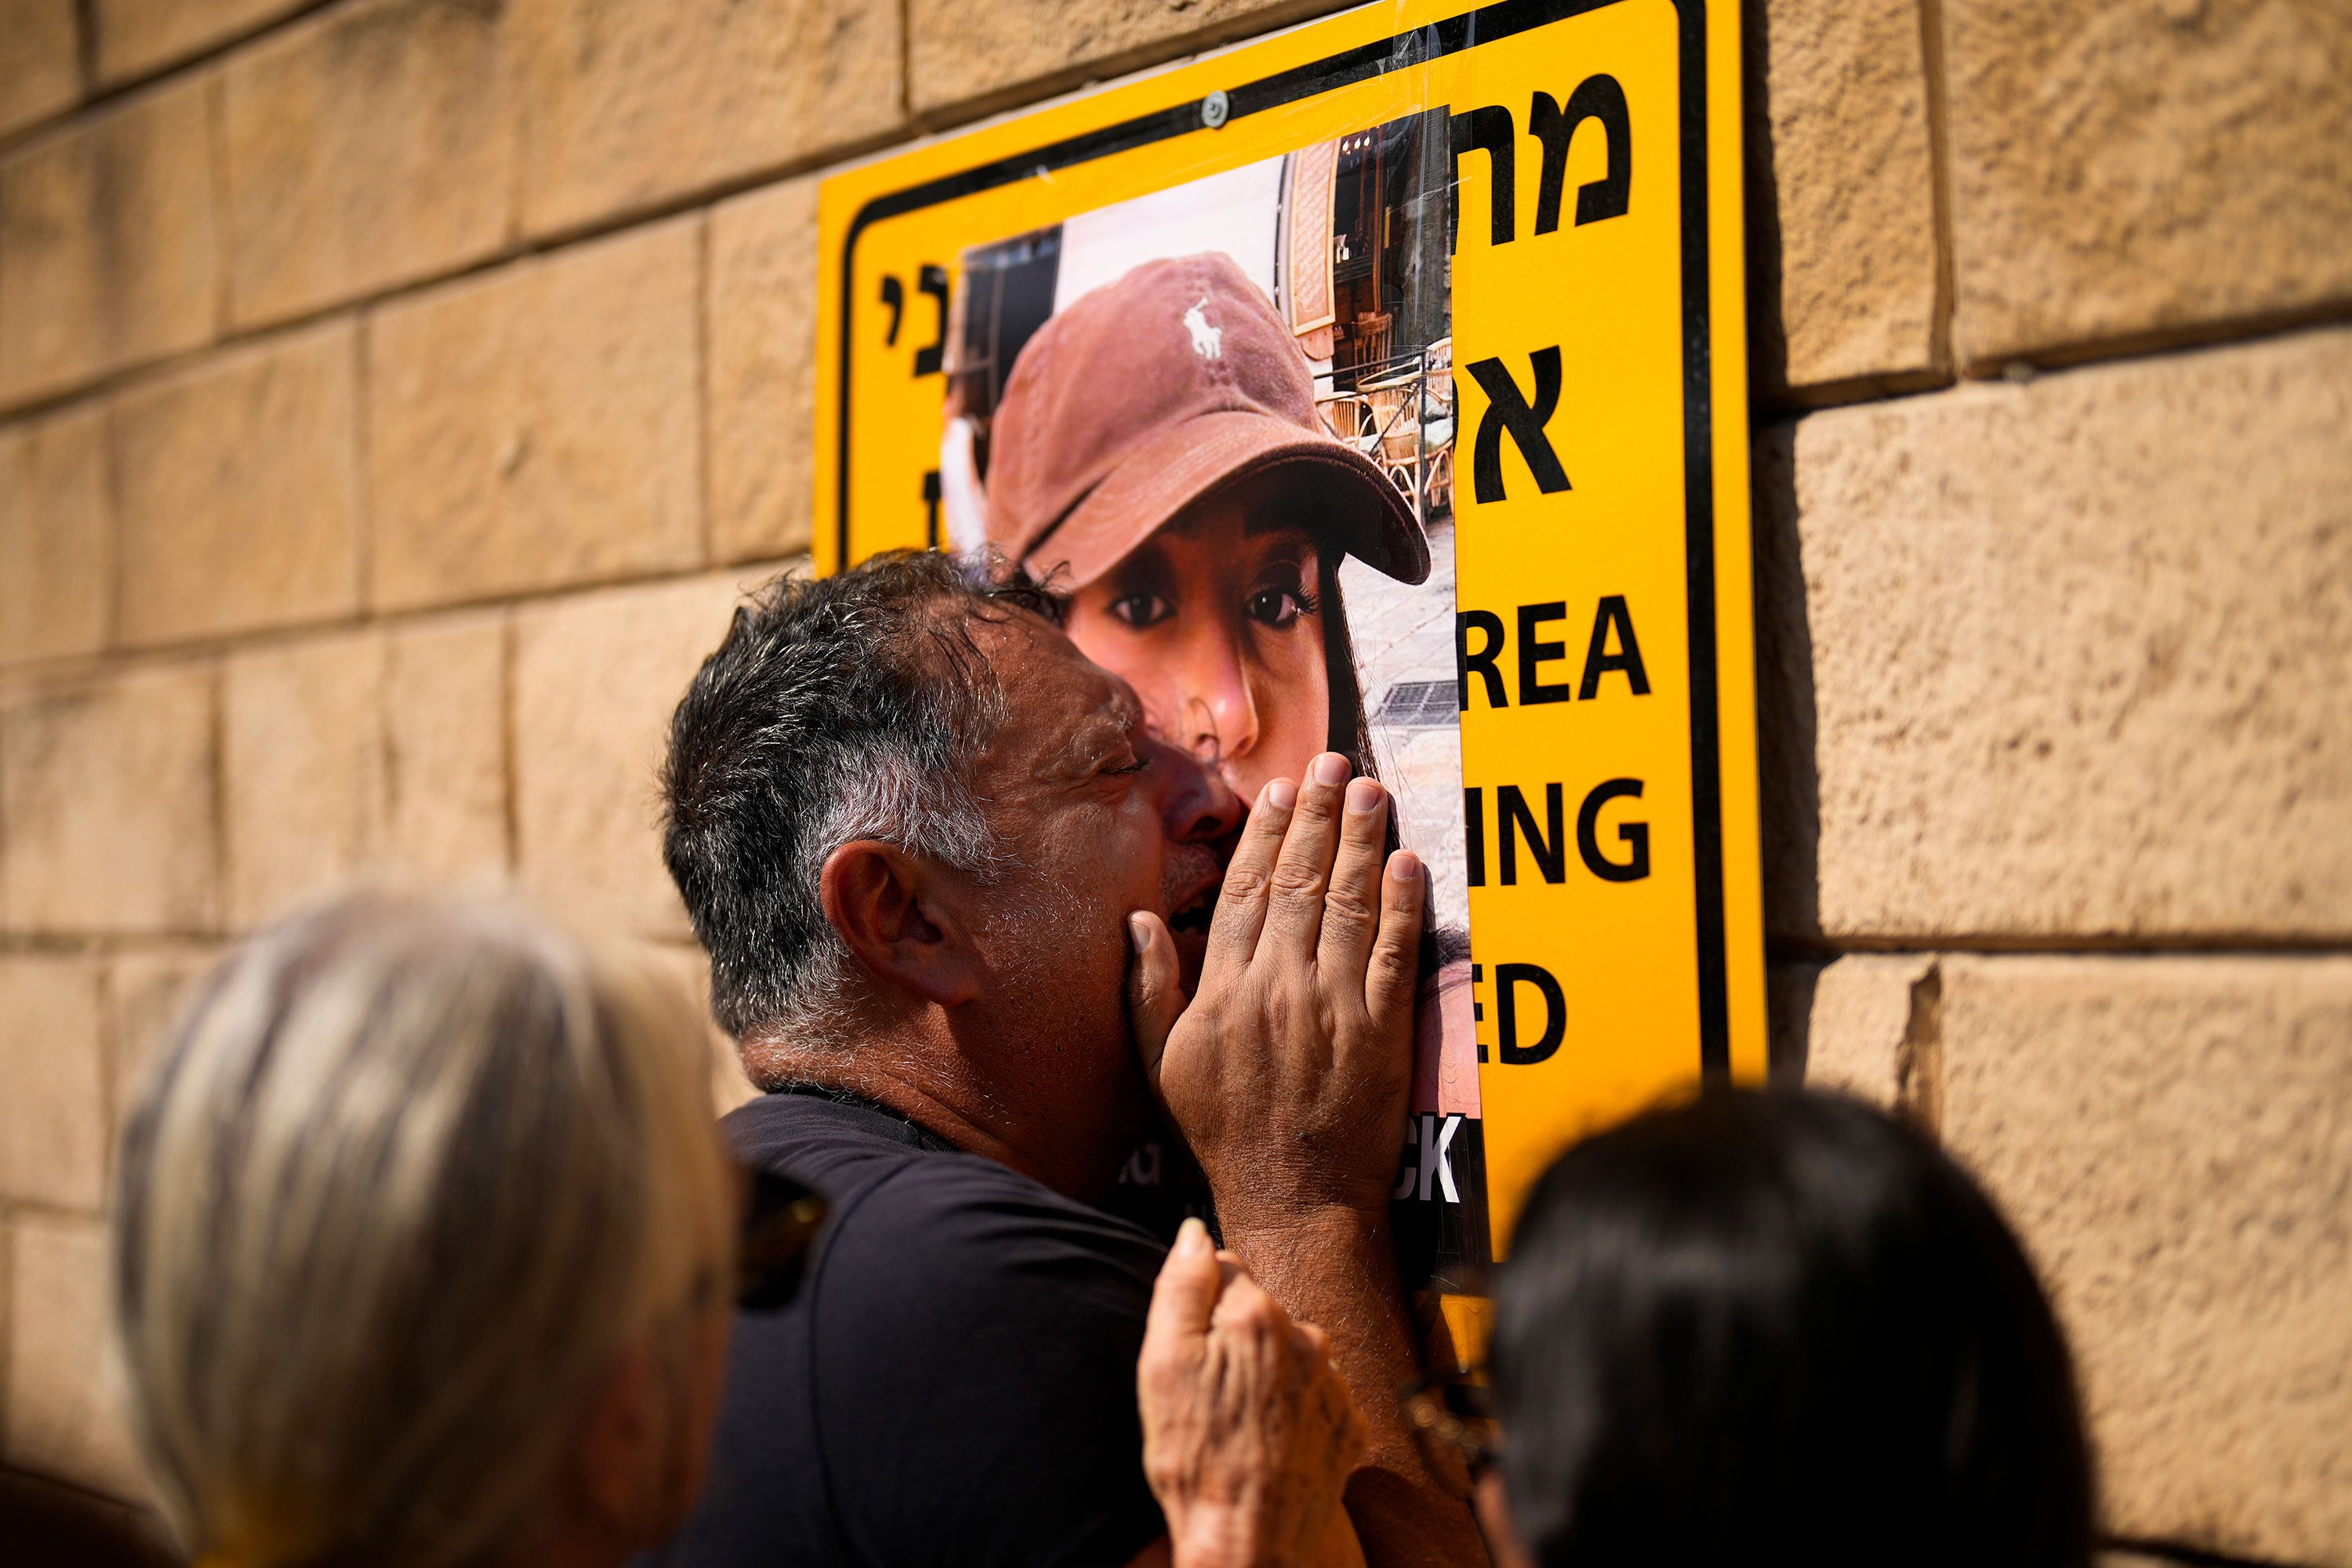 Eli Albag cries over the photograph of his daughter Liri, as he gathers with others during a protest demanding the release of more than 100 Israelis who were abducted during last week's Hamas attack, in Tel Aviv, Israel, on October 14.